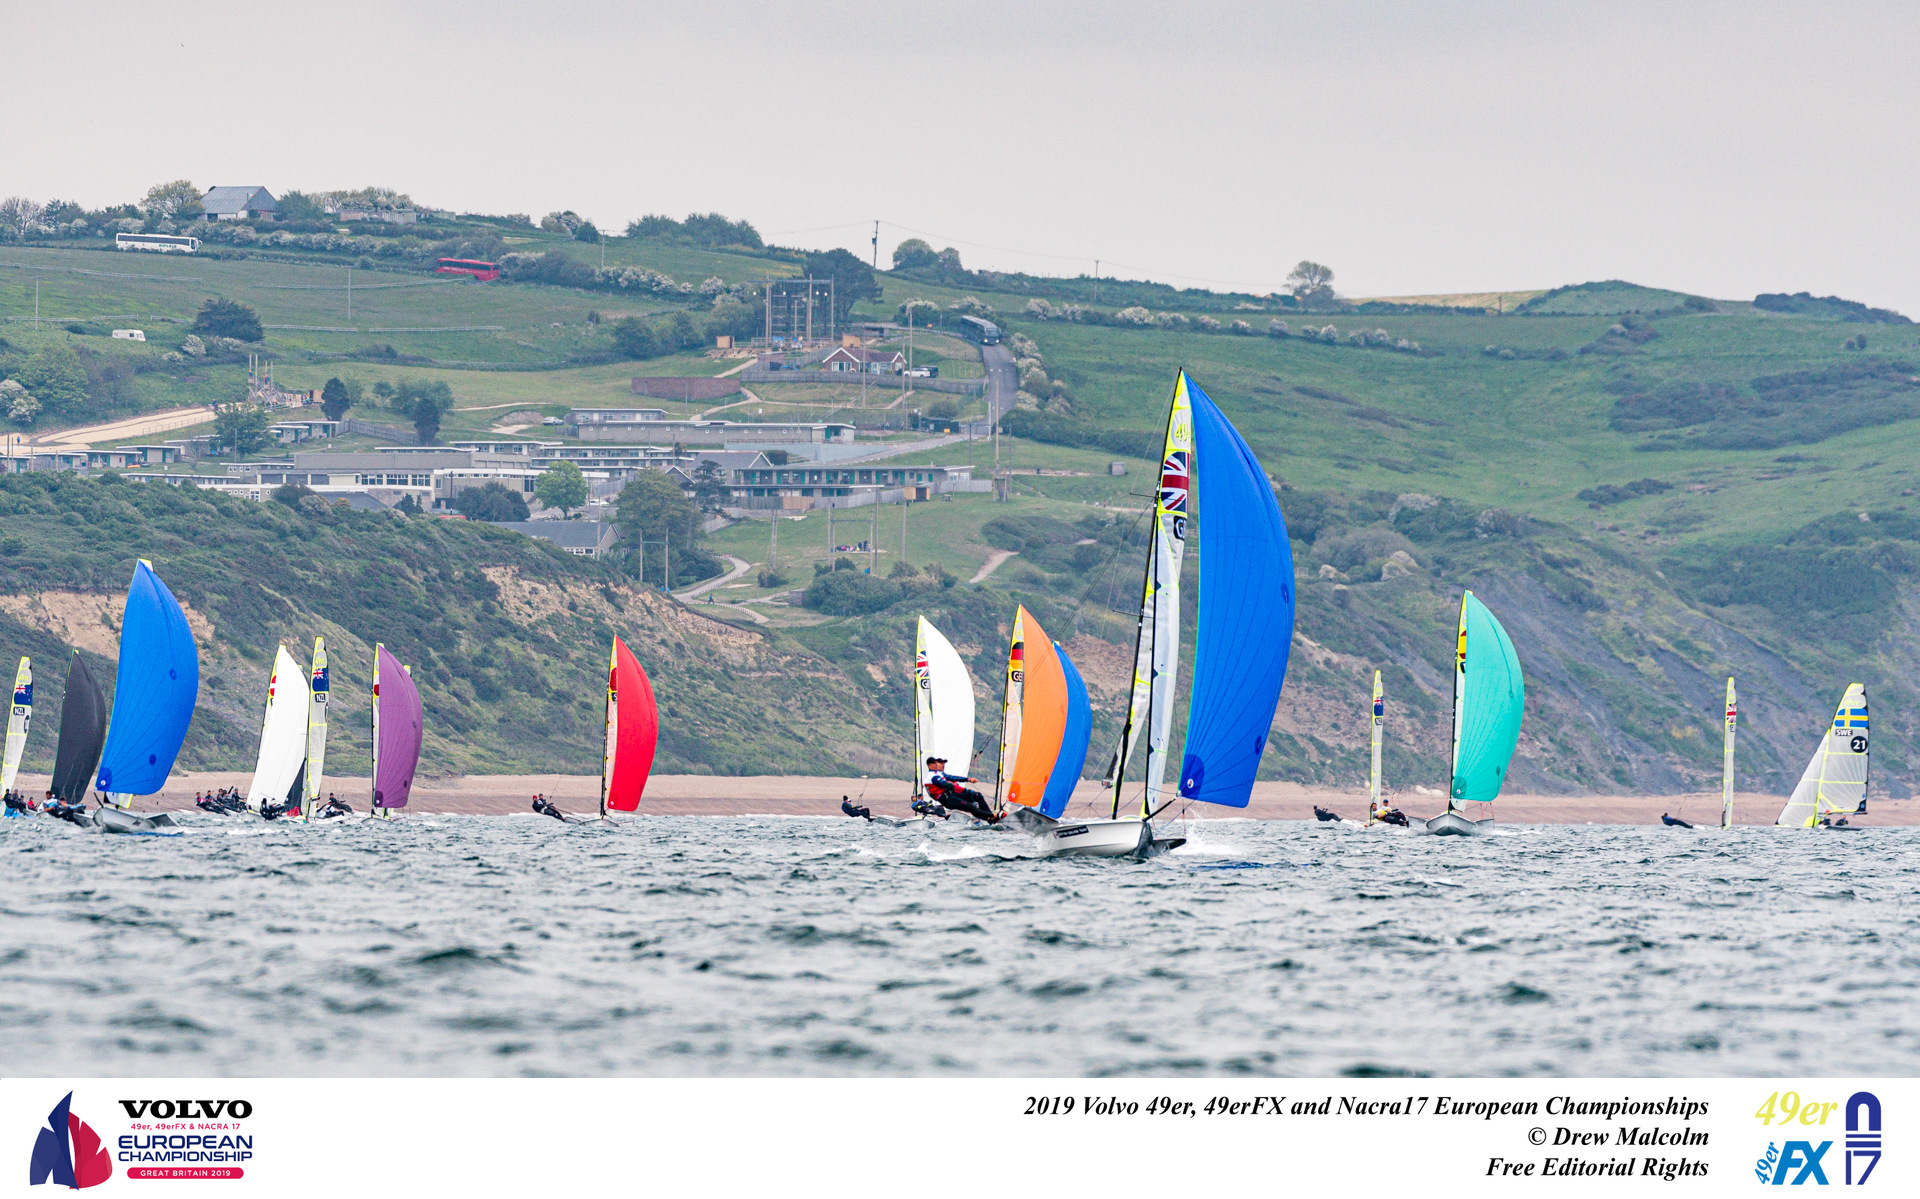 49er Men: Heil and Ploessel master a random day in the Bay